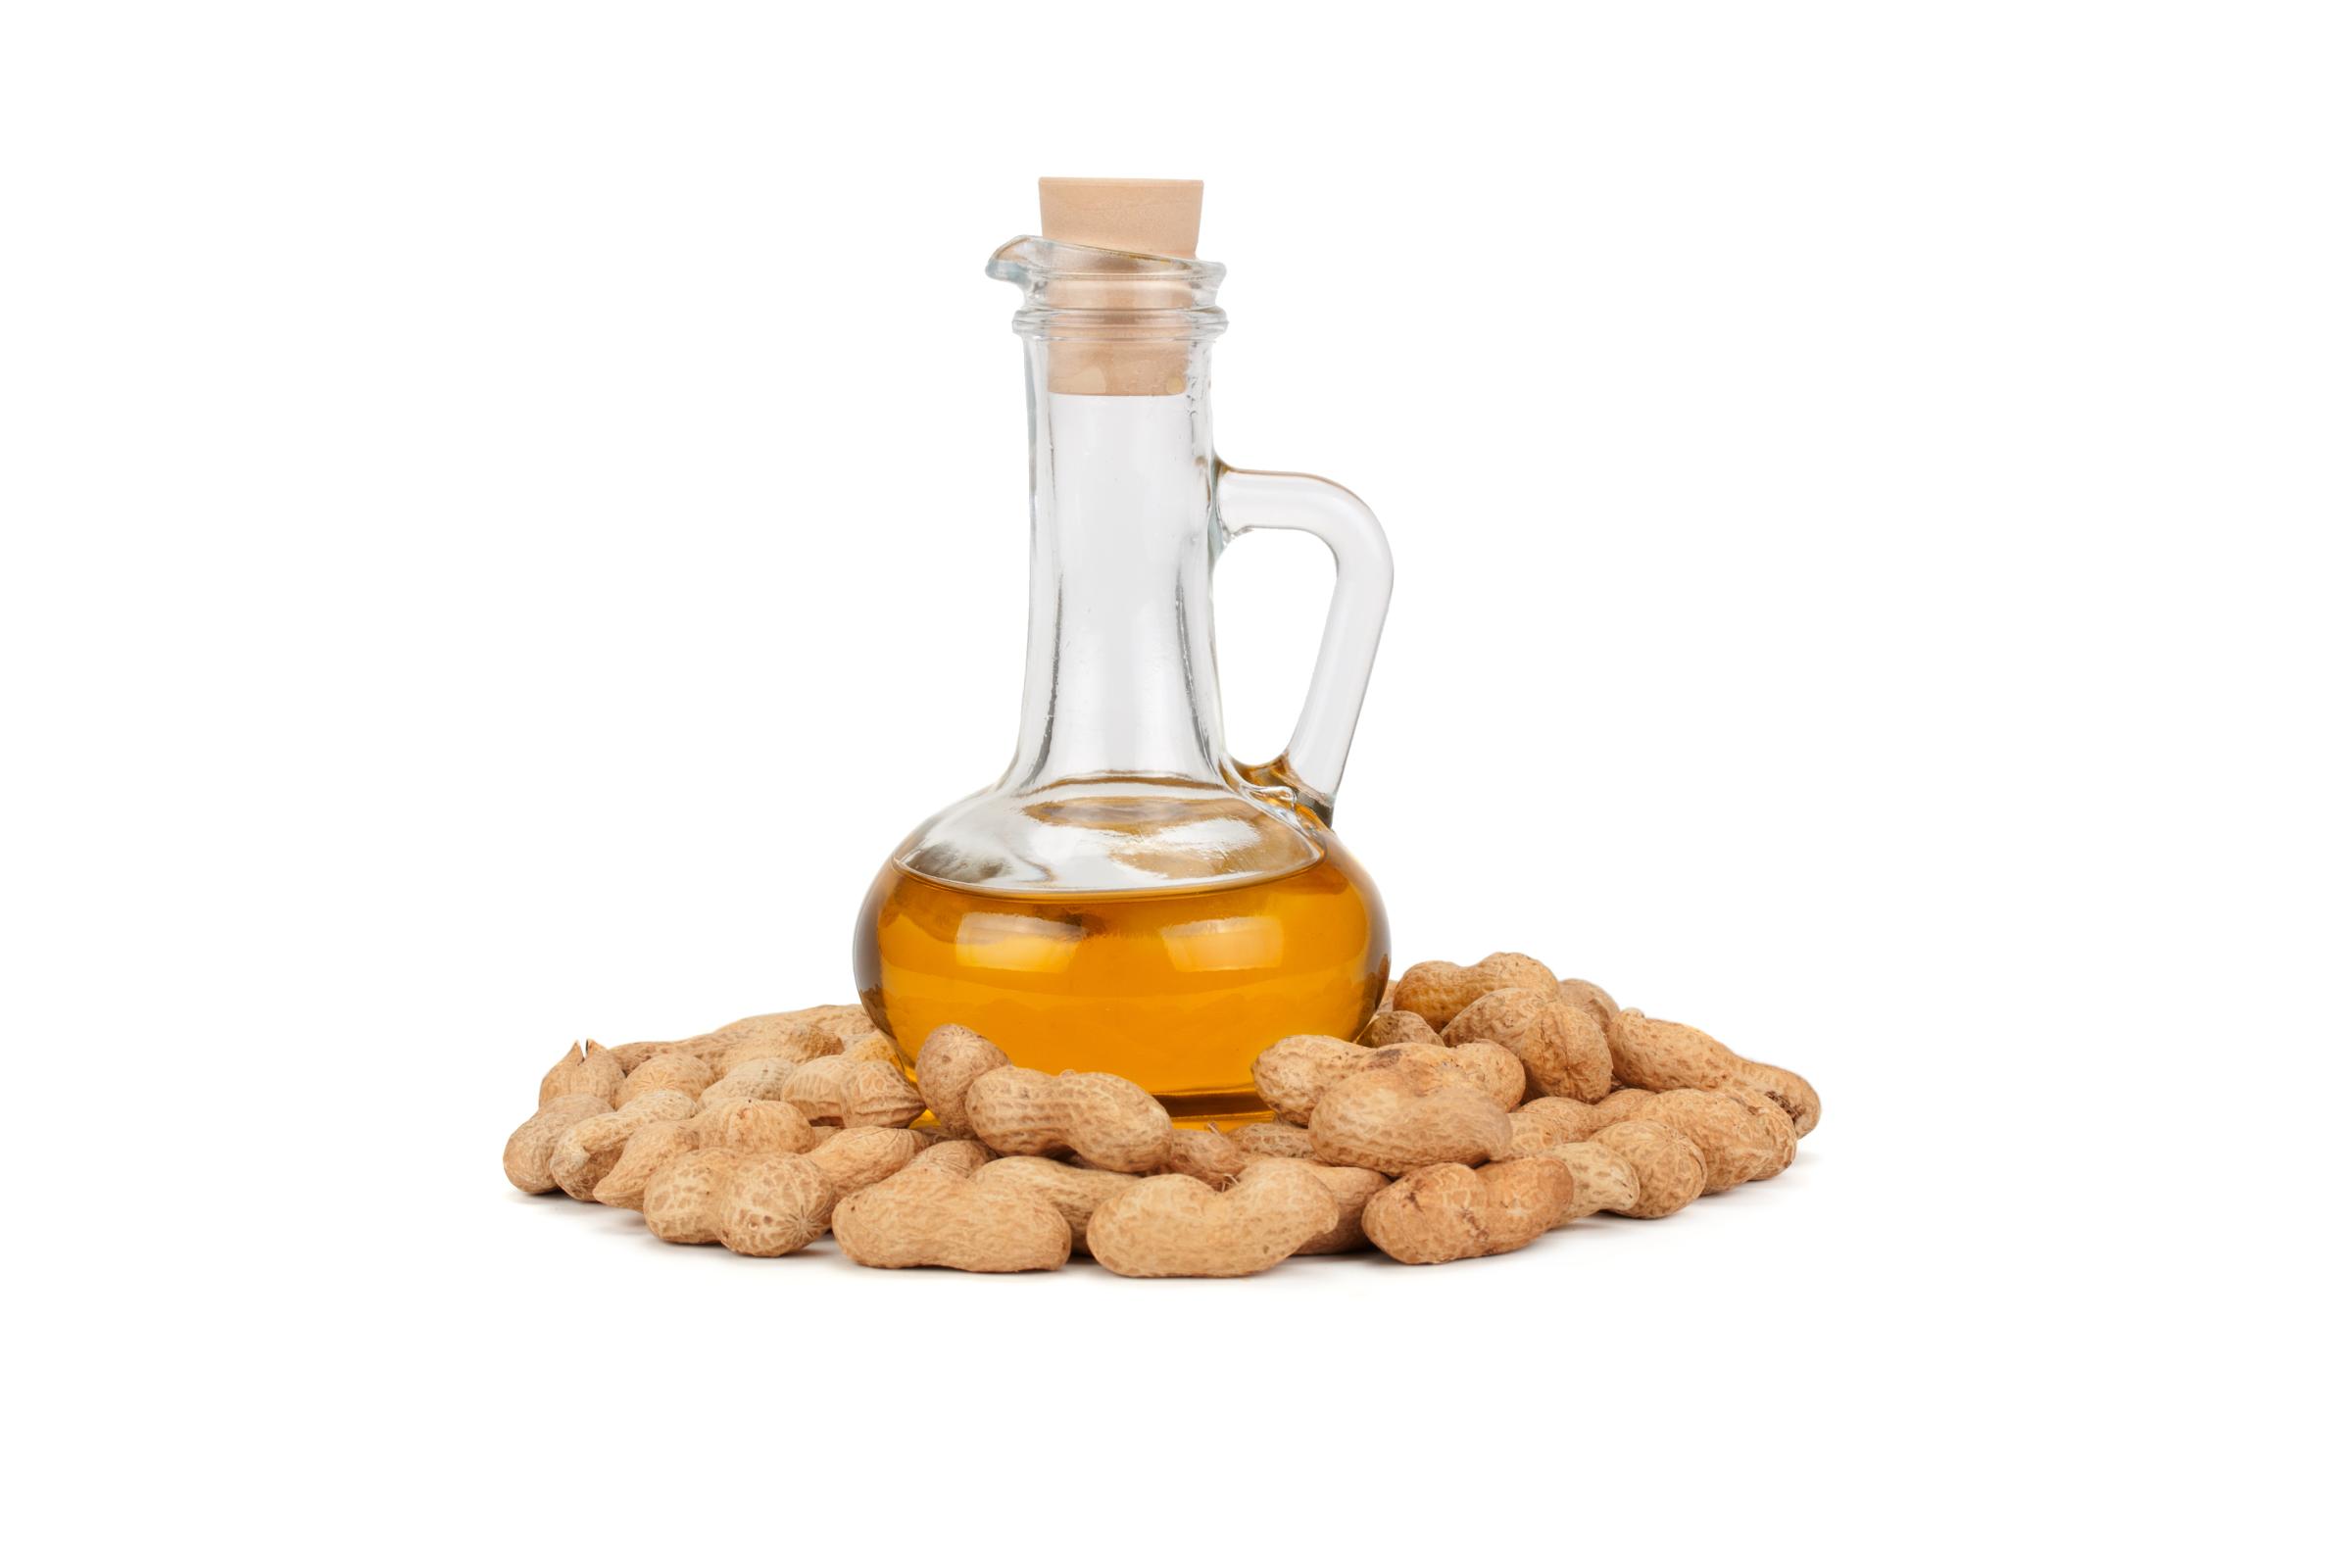 peanuts and oil in bottle